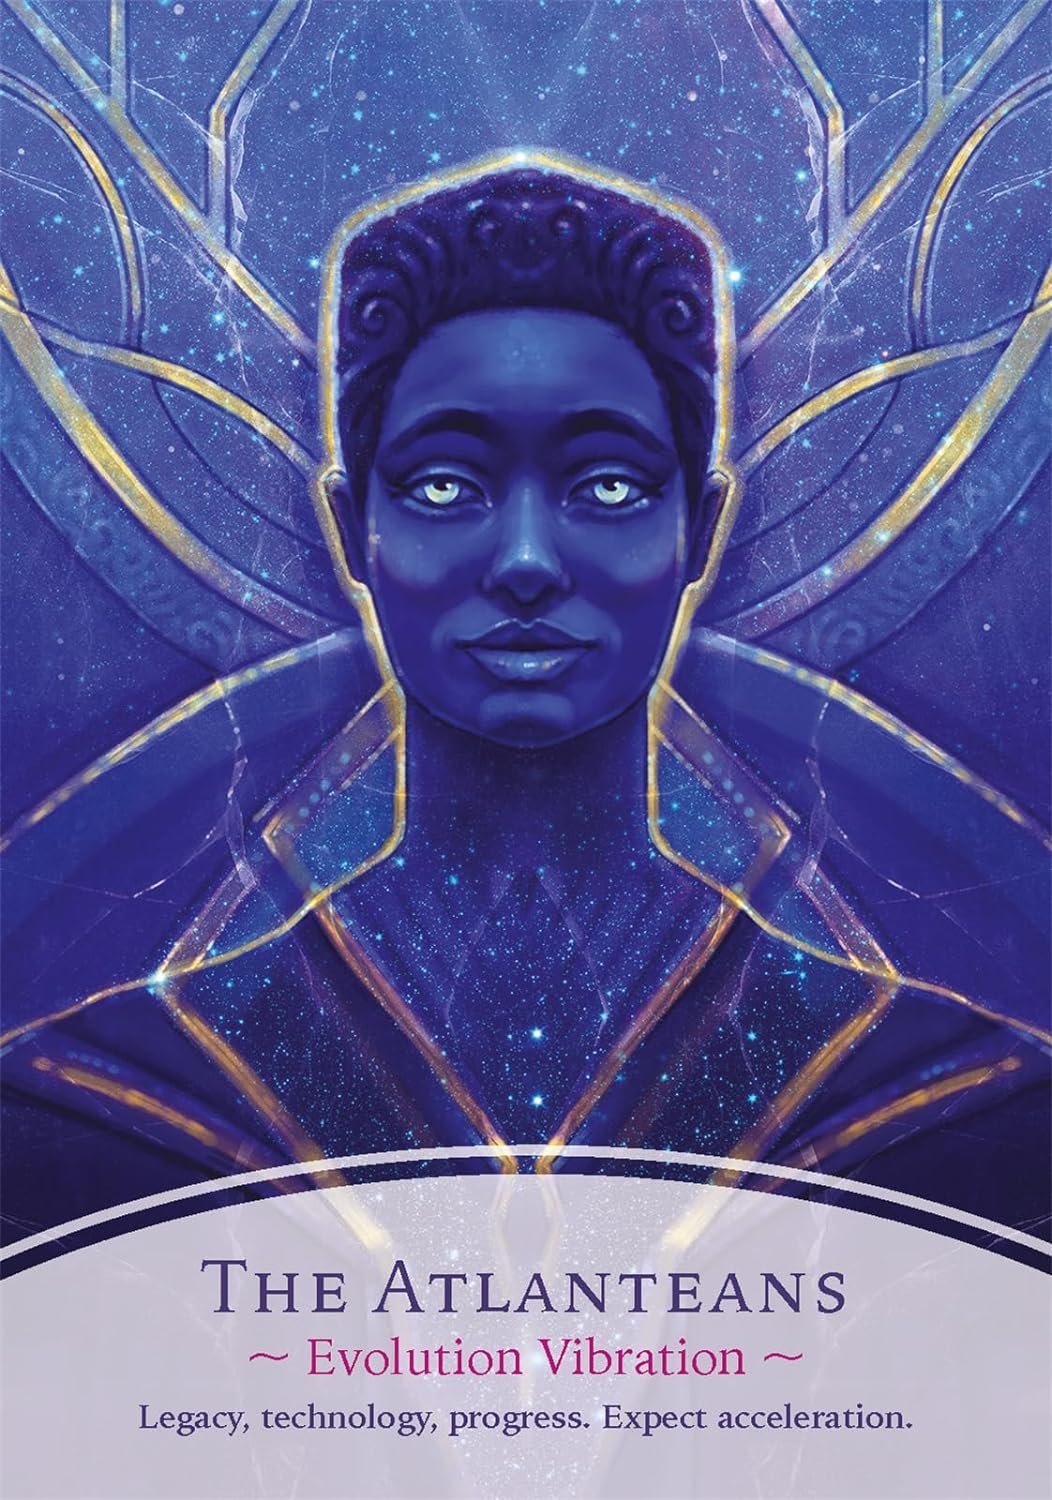 The Divine Masters Oracle; Kyle Gray